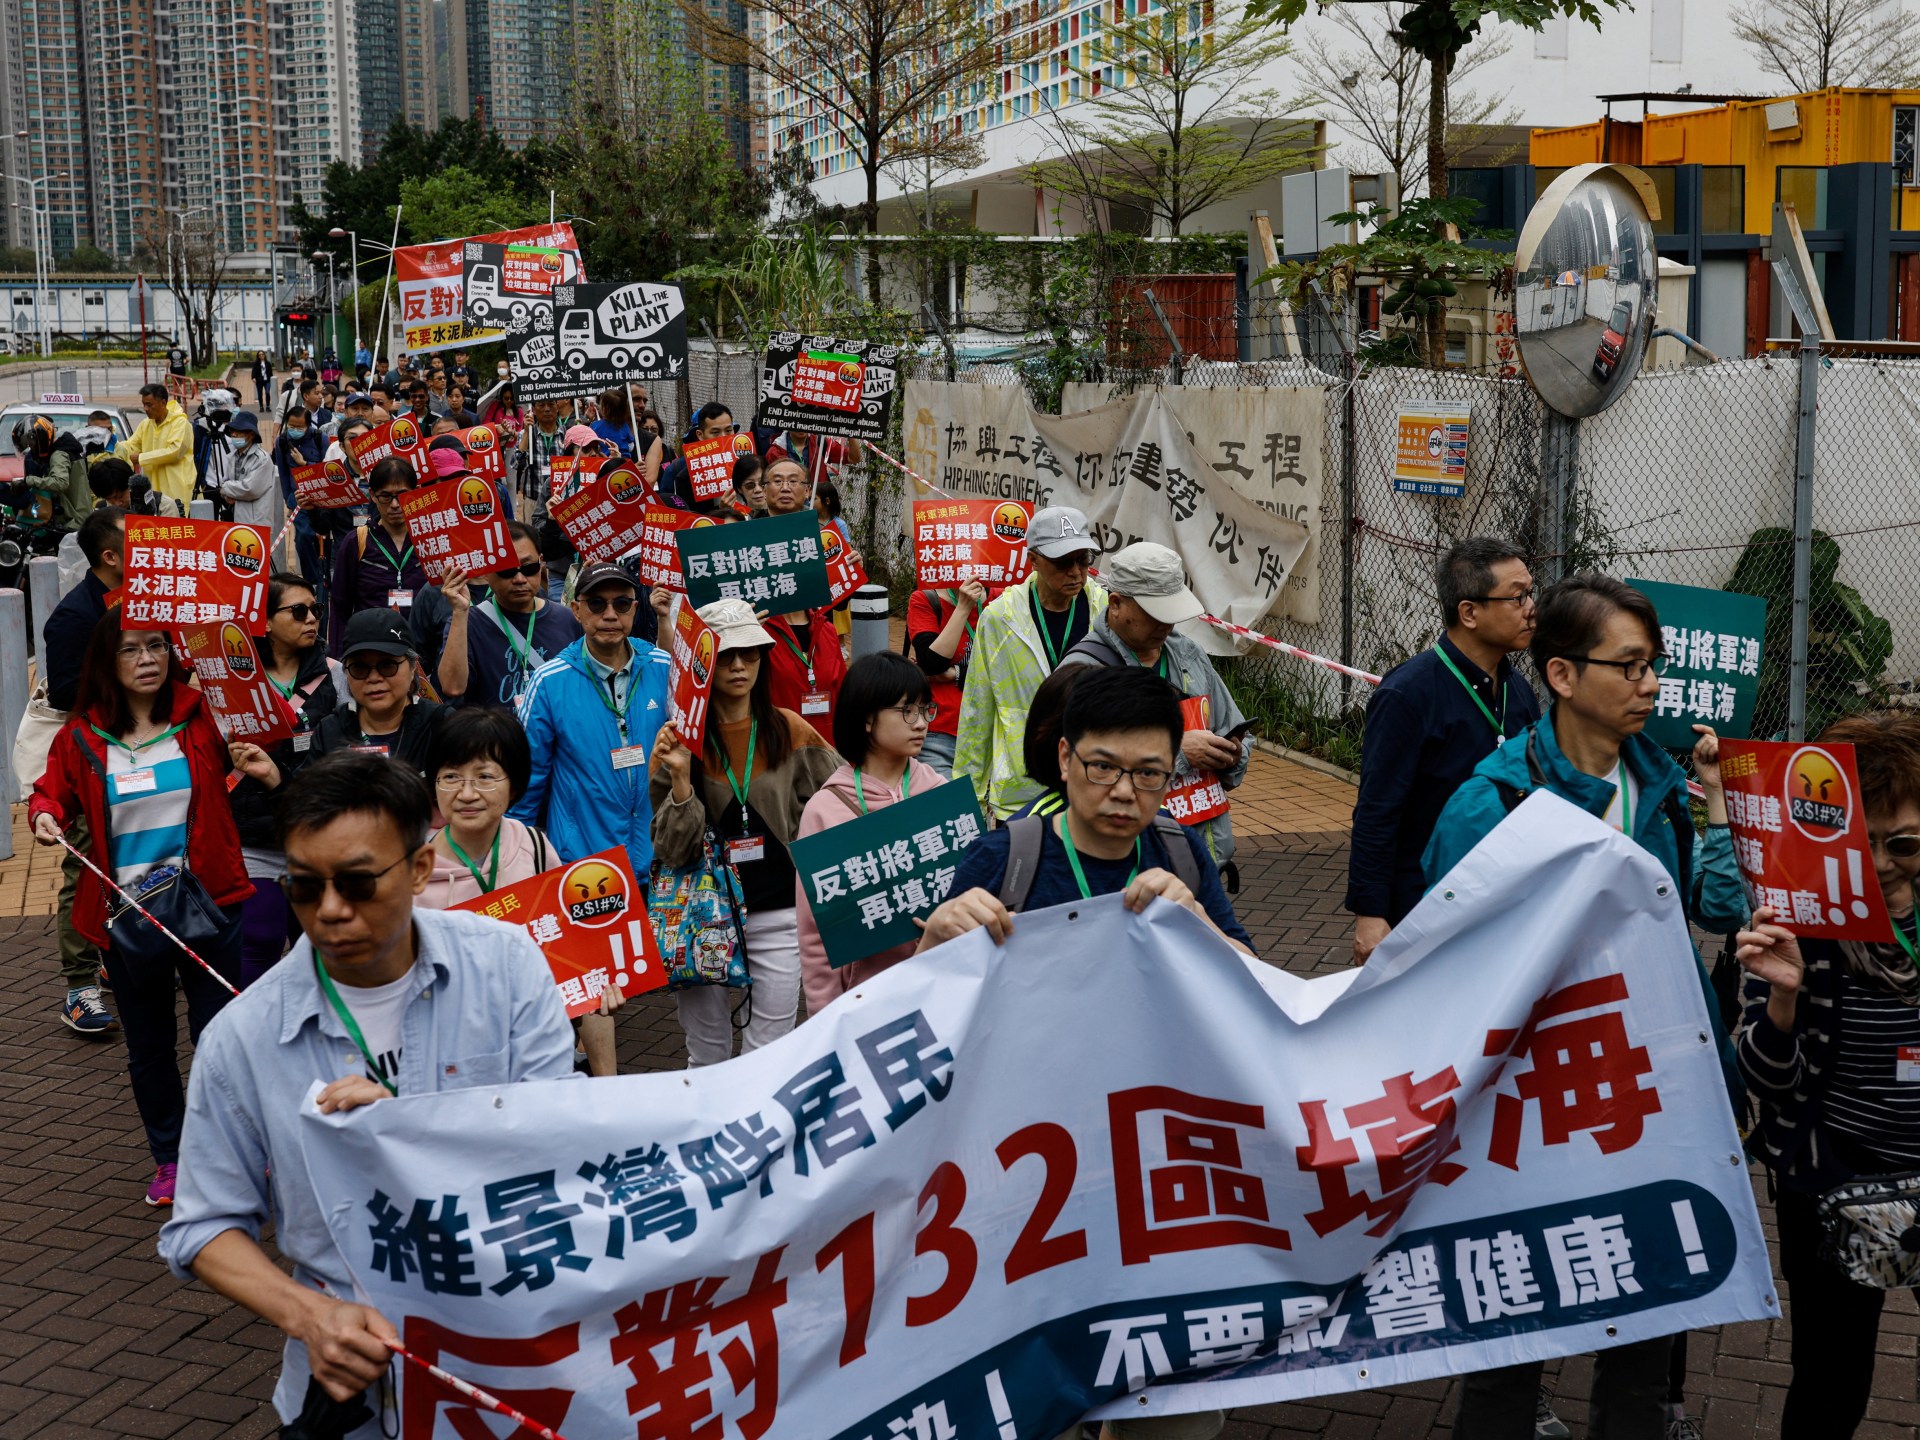 Hong Kong residents hold first protest in years under new rules